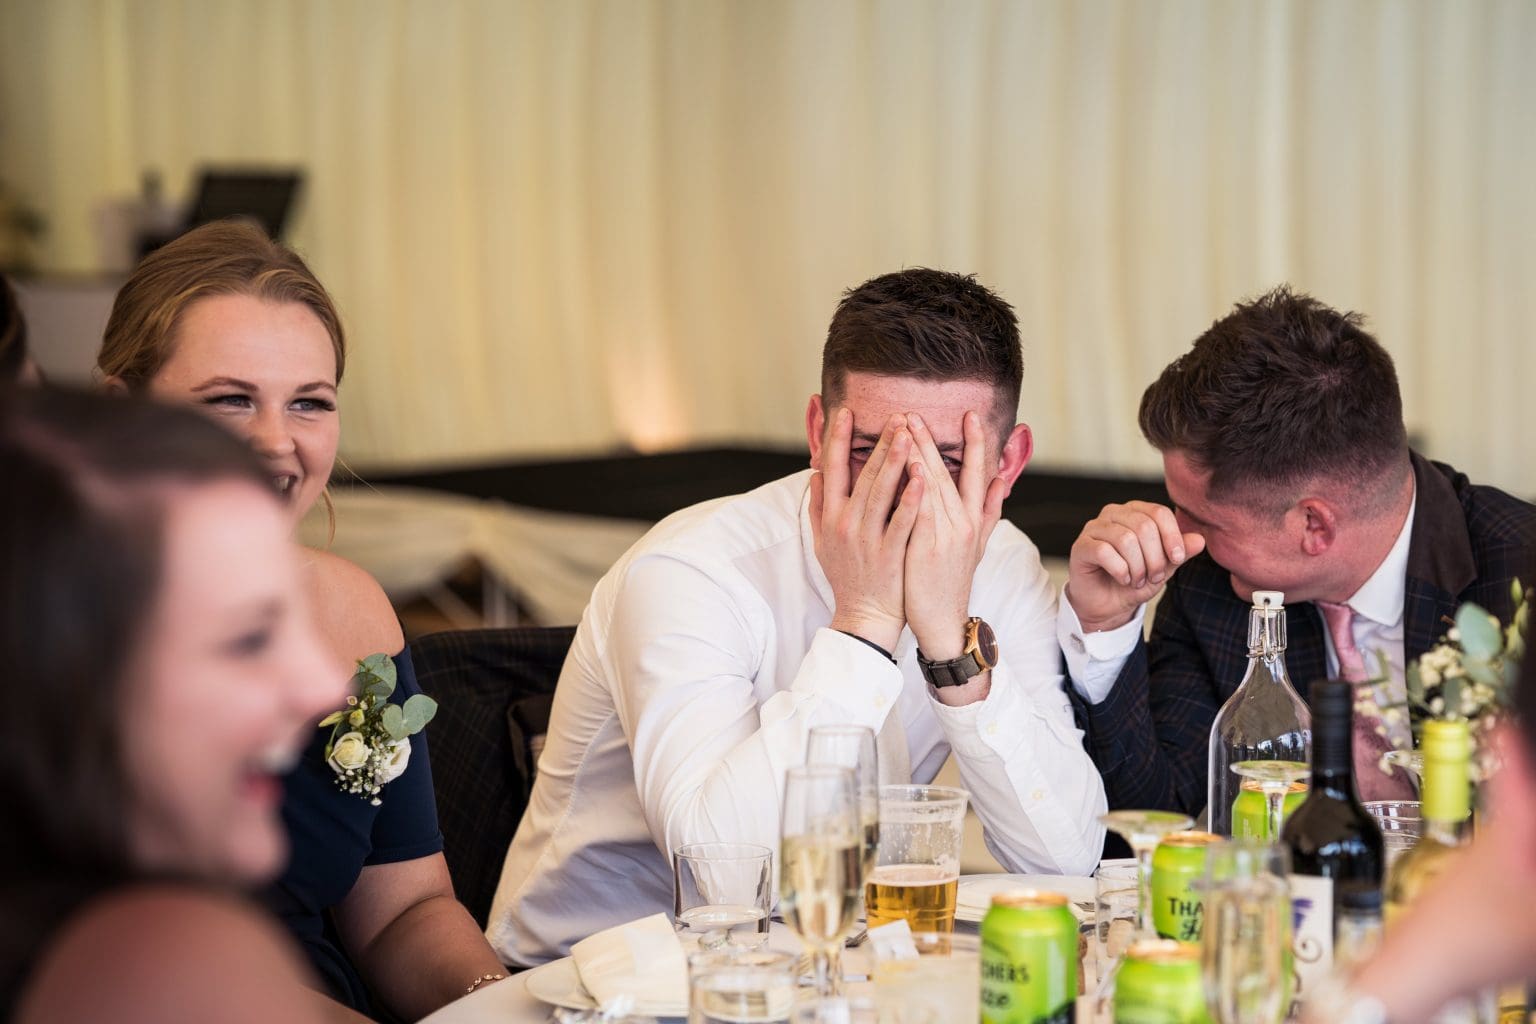 Pedge Photography capturing the candid moments of a wedding speech at this Tewkesbury Wedding